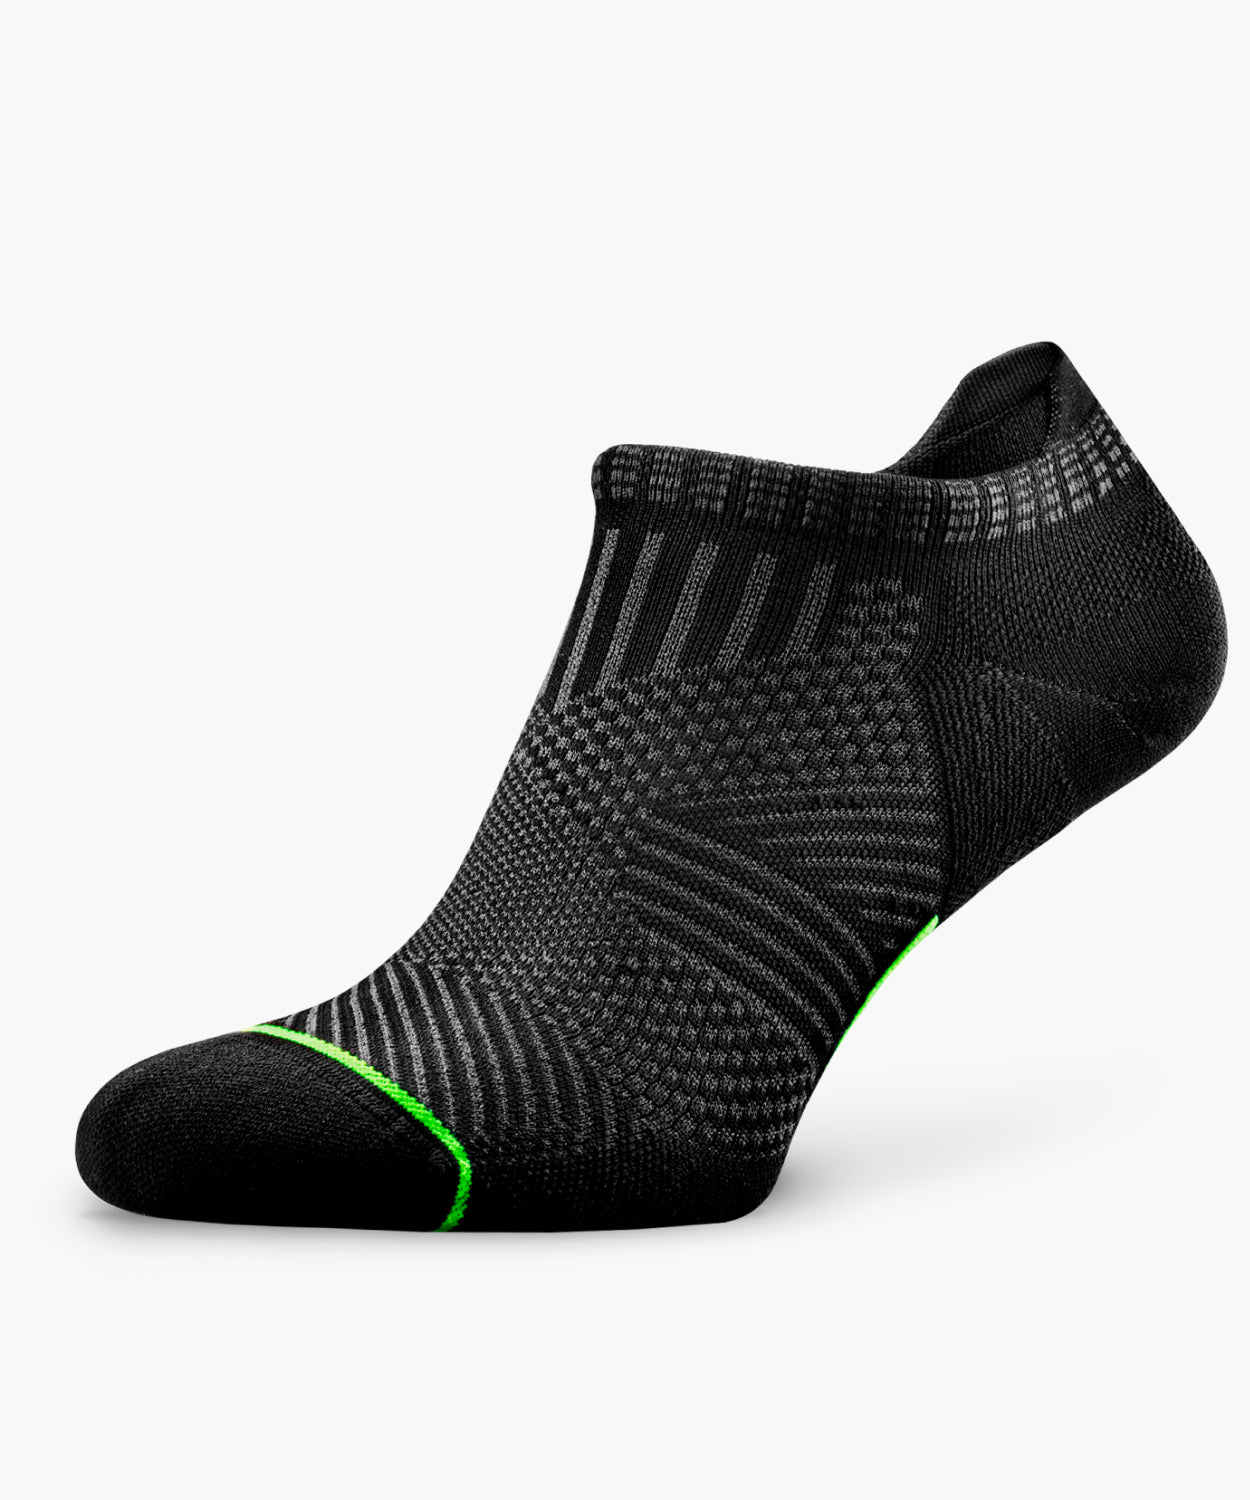 Rockay Accelerate Socks Performance Review - Believe in the Run